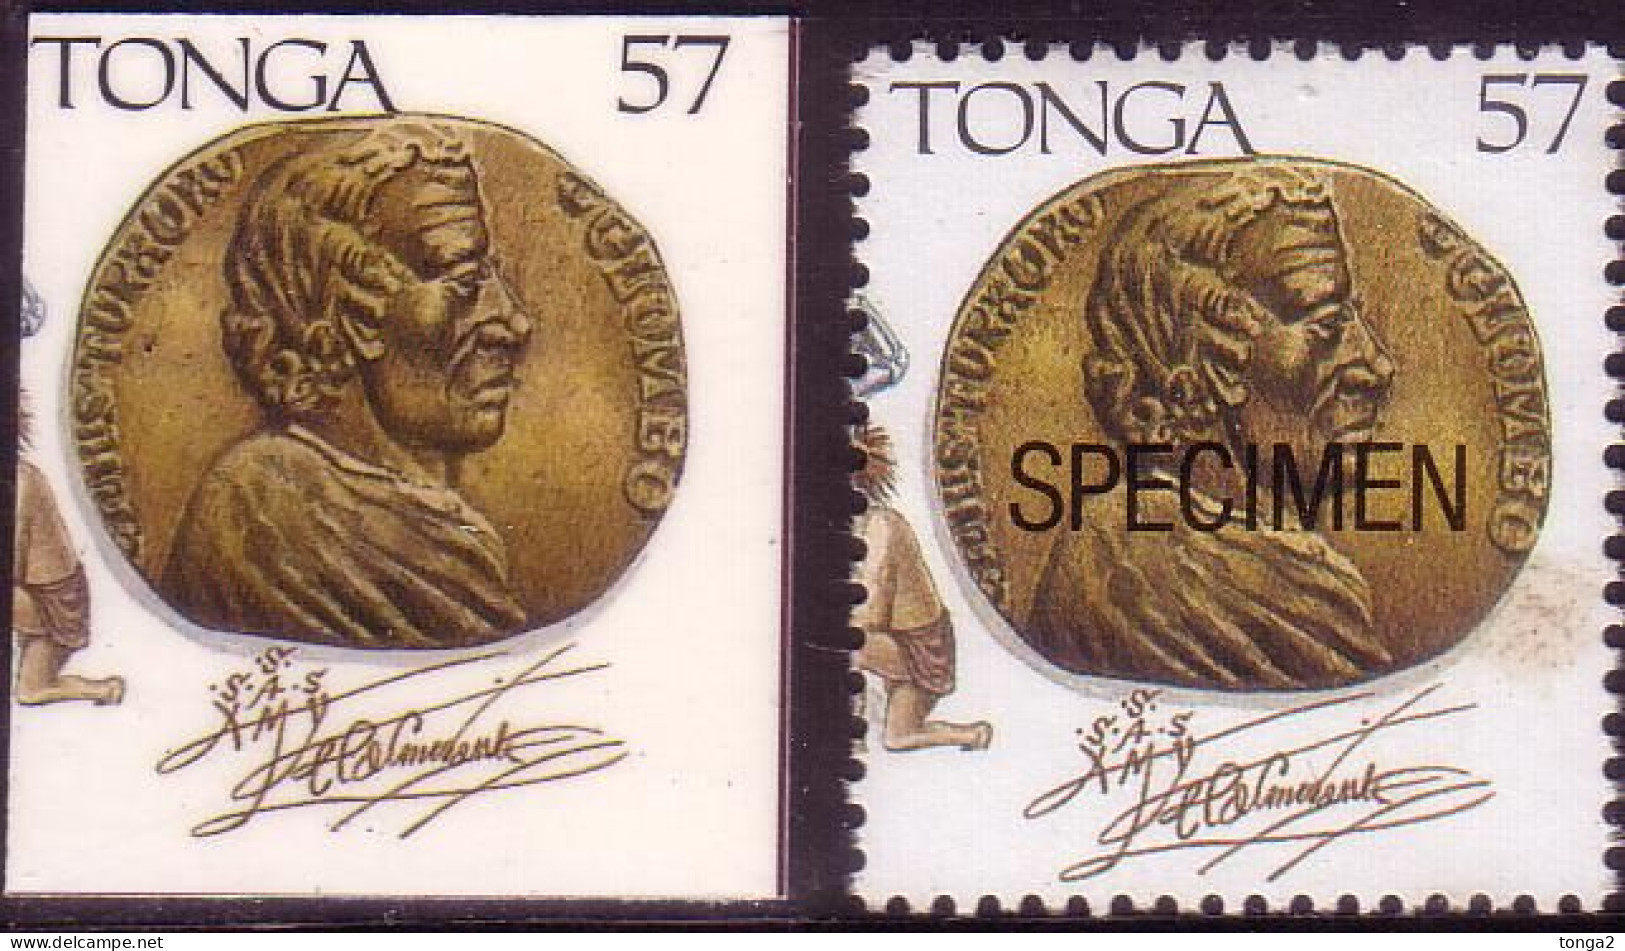 Tonga 1992 Cromalin Proof - Gold Medal Showing Columbus And His Signature - 4 Exist - Christophe Colomb